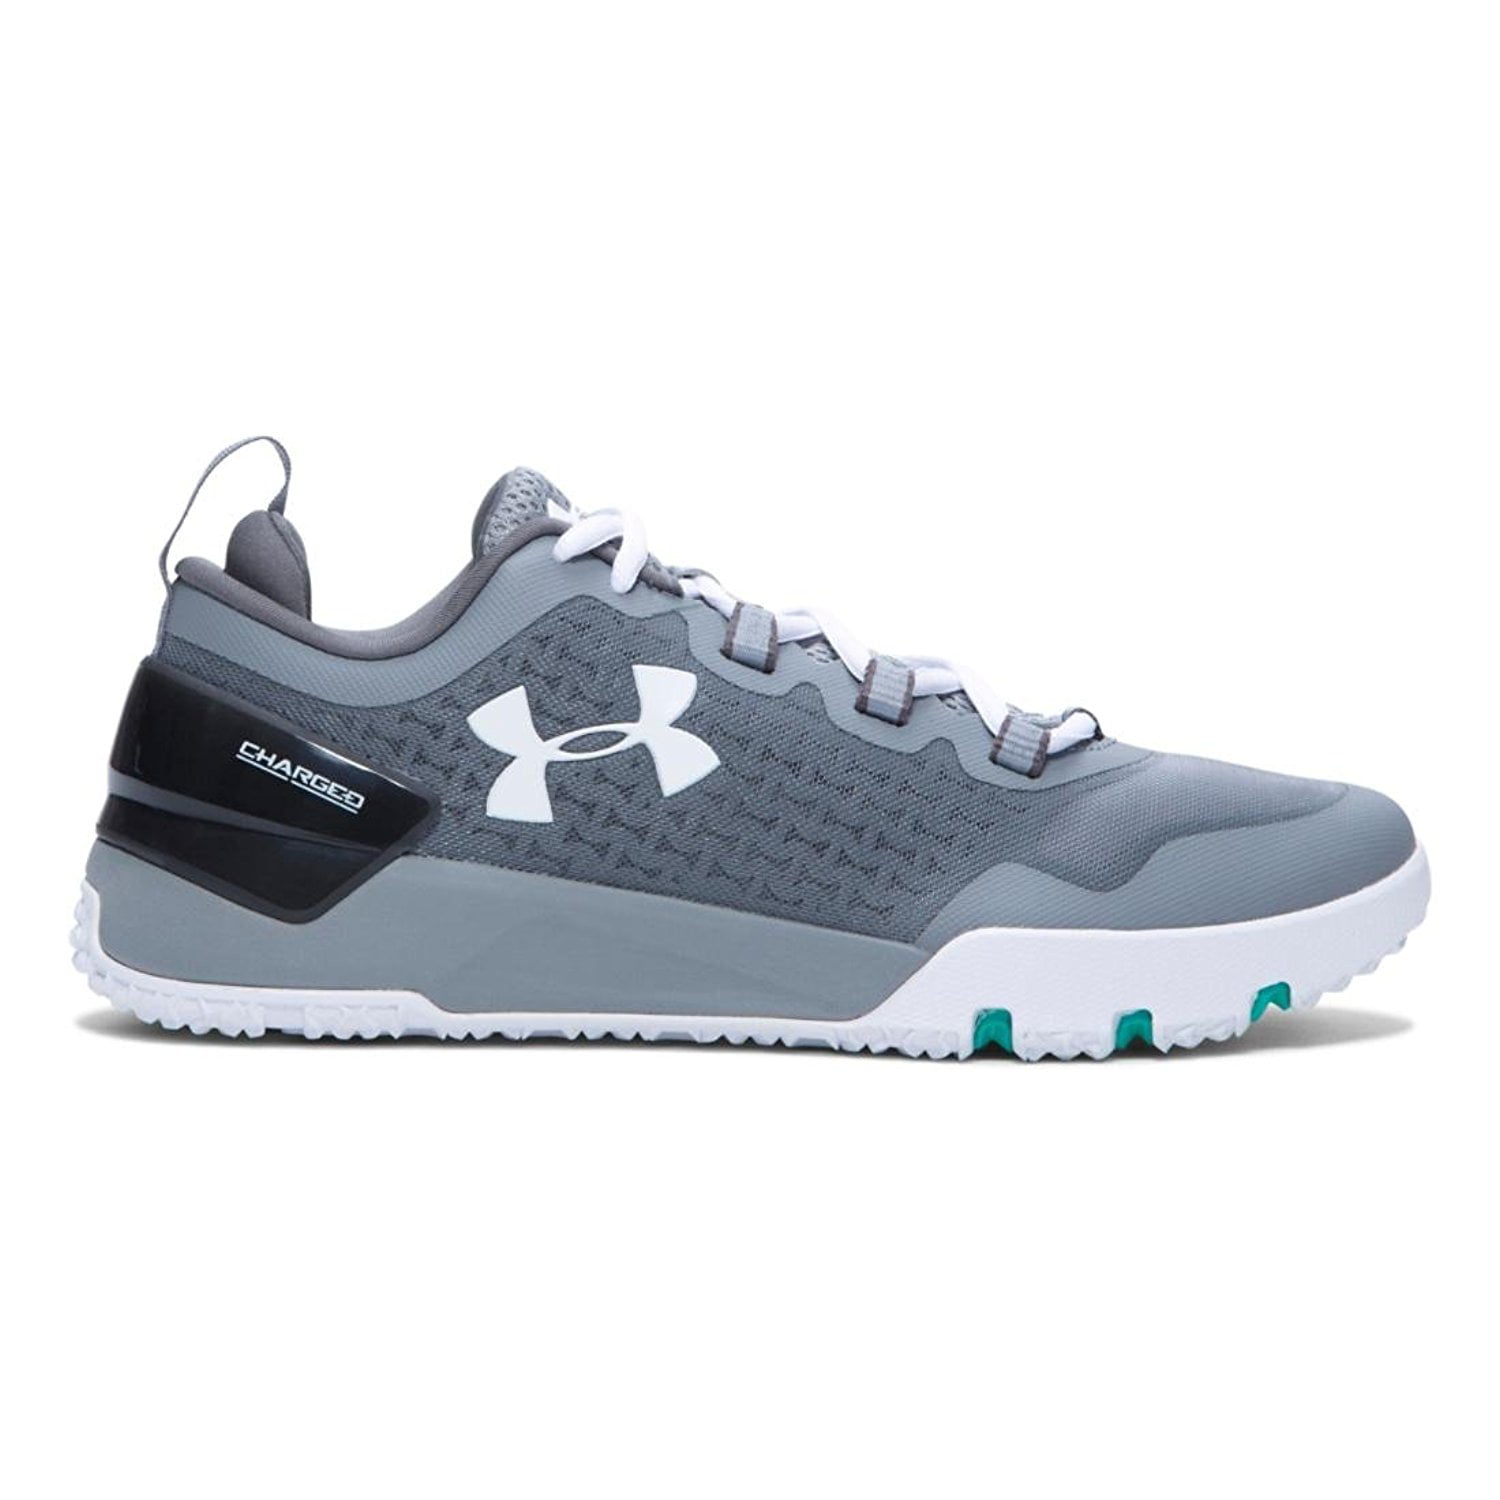 Under Armour Men's UA Charged Ultimate Training Shoes Steel/Graphite ...